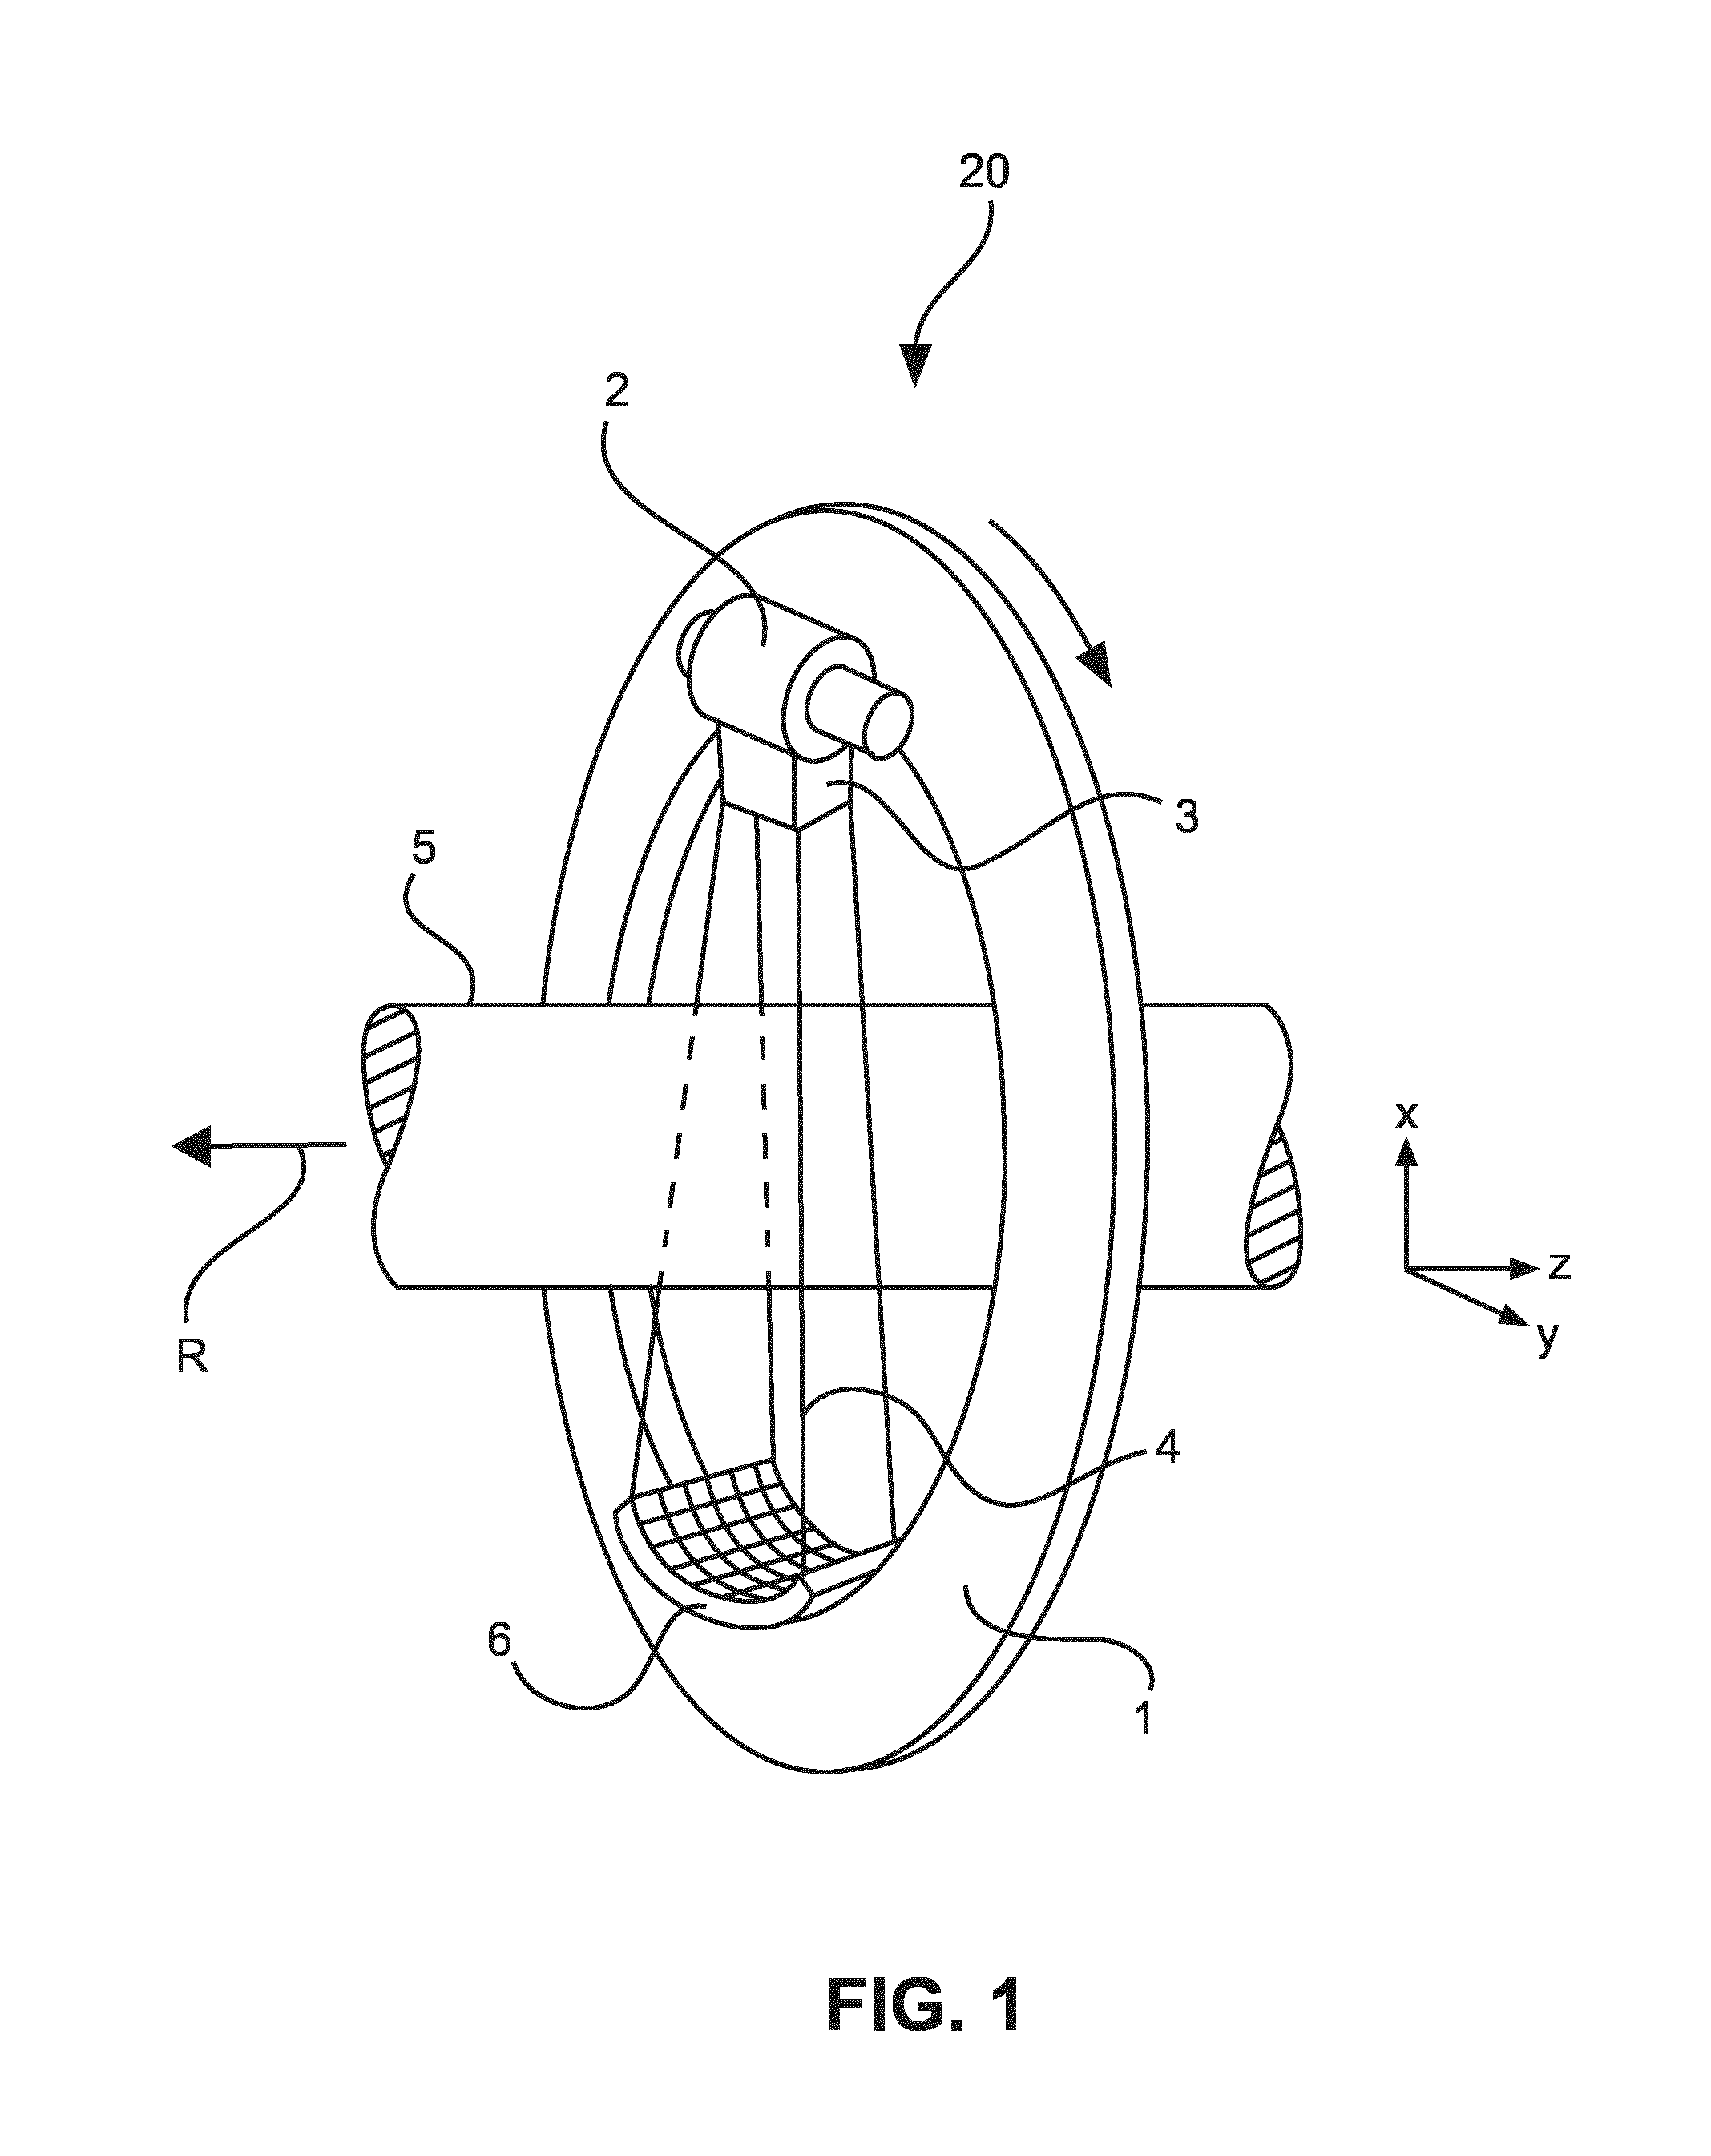 Detection device for detecting photons and method therefore